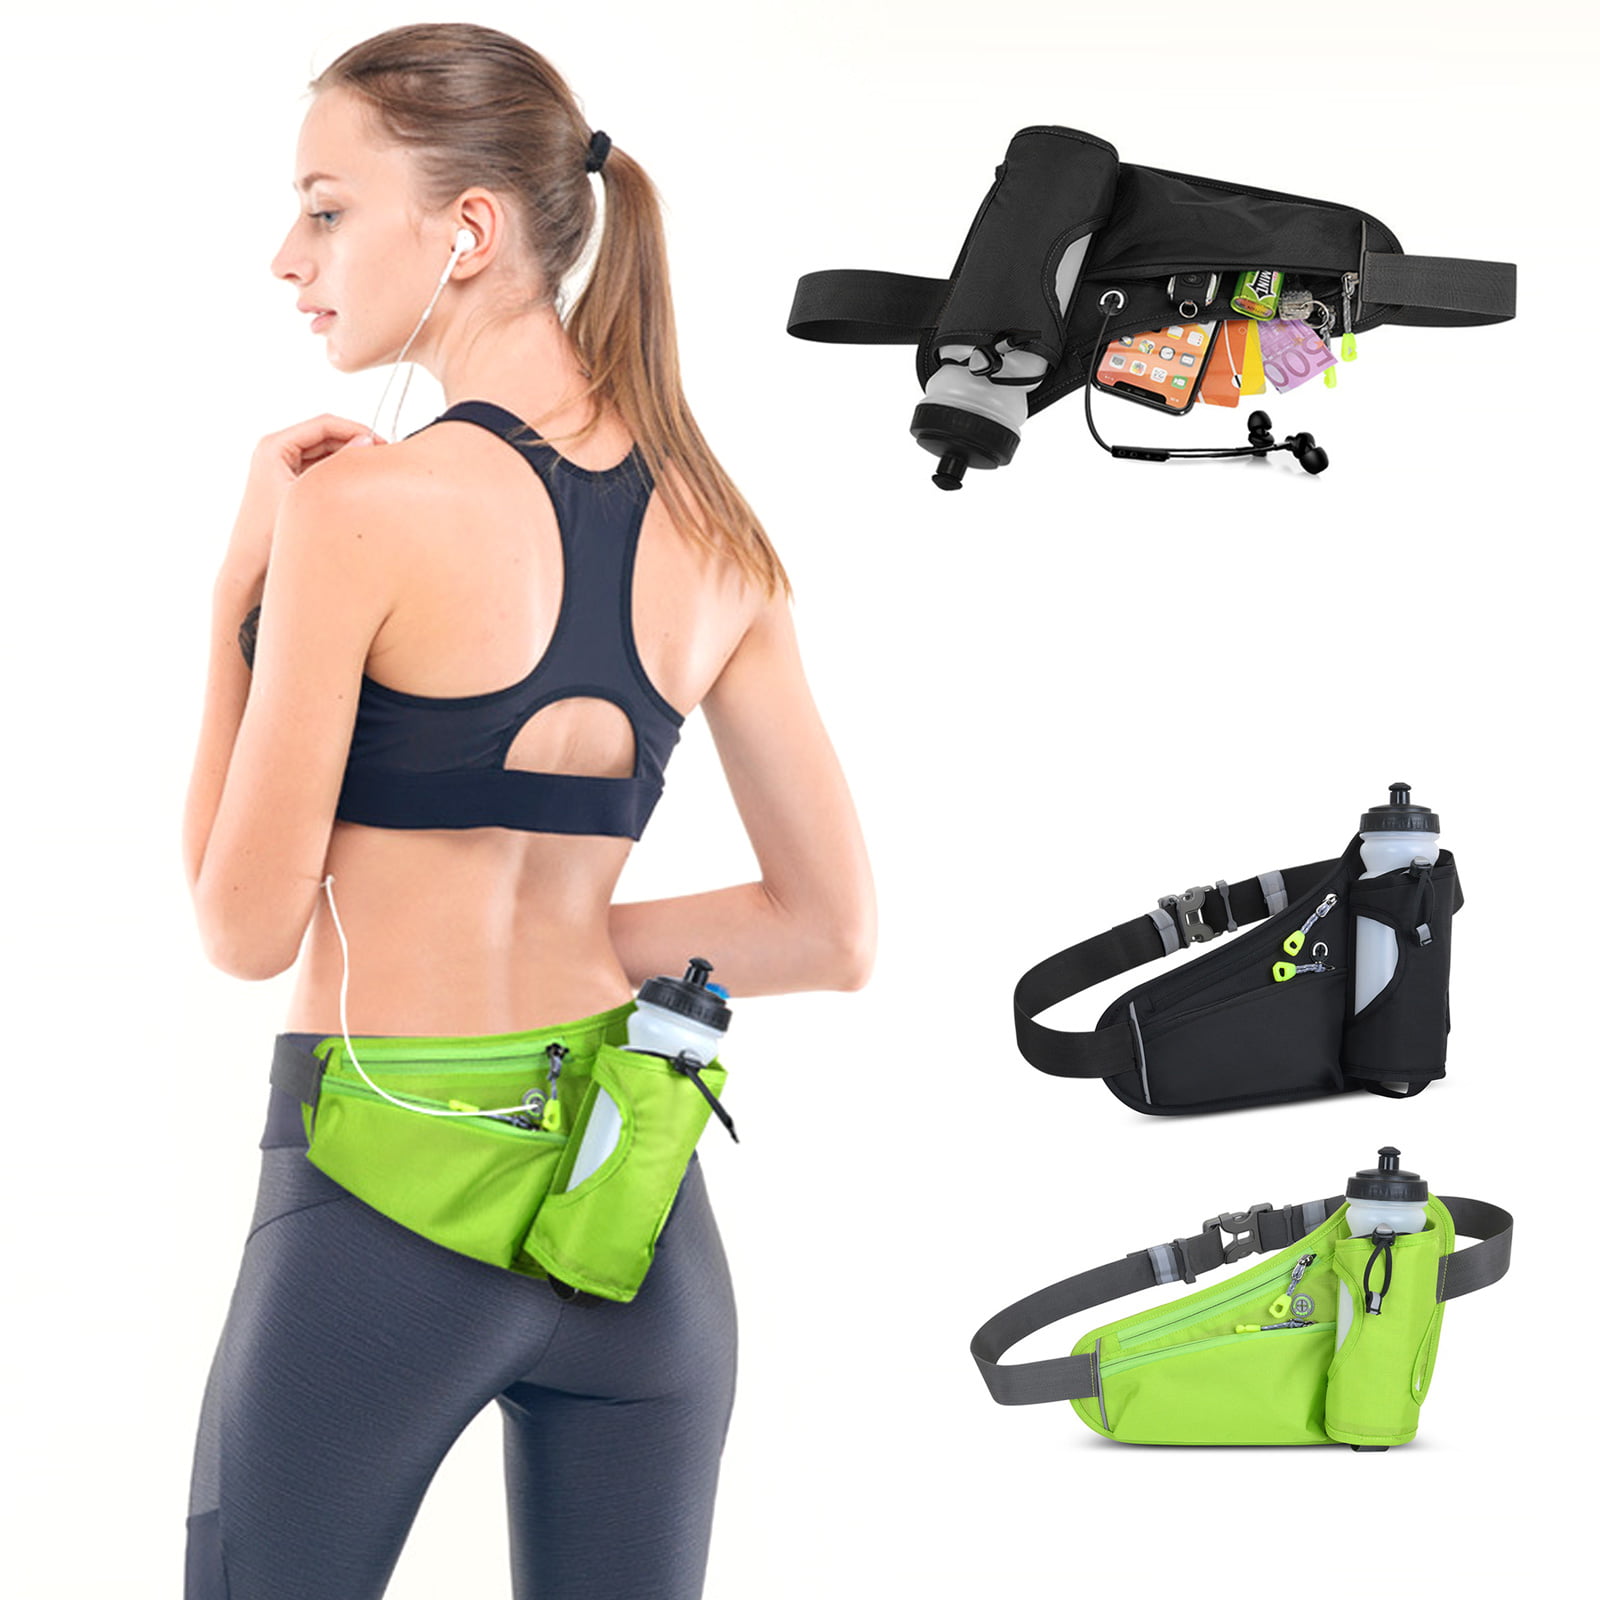 Running Cooliya Waterproof and Lightweight 4-Zipper Pockets Sports Fanny Bag/Bum Pack with Adjustable Belt Strap for Dog Walking,Hiking Cycling 